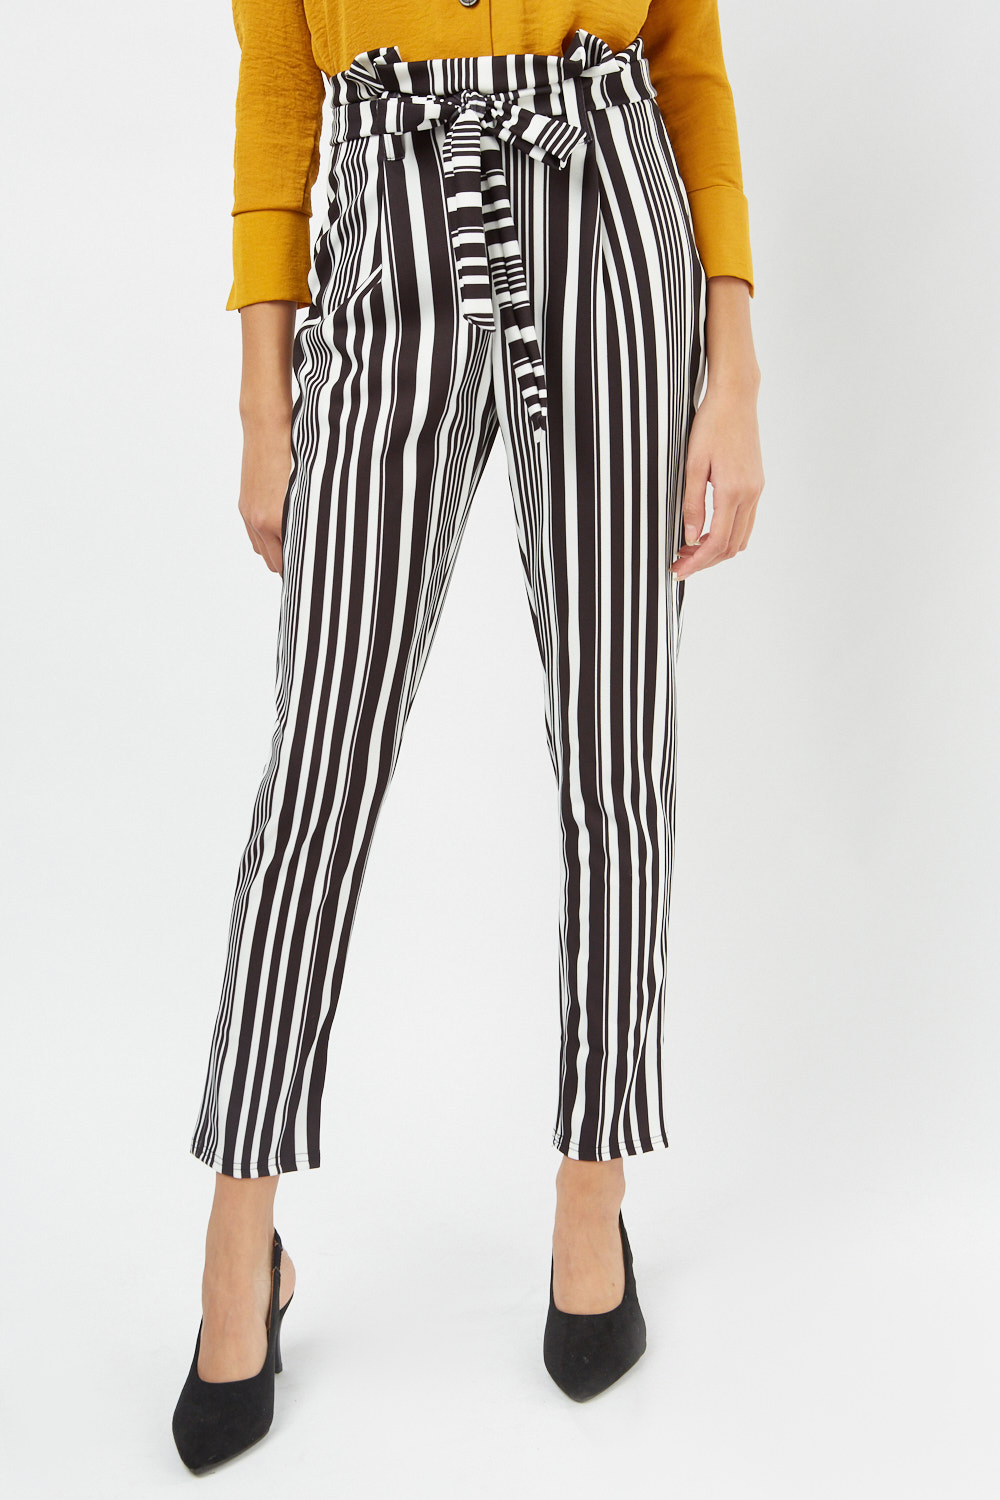 Striped Tie Up Peg Trousers - Just $7